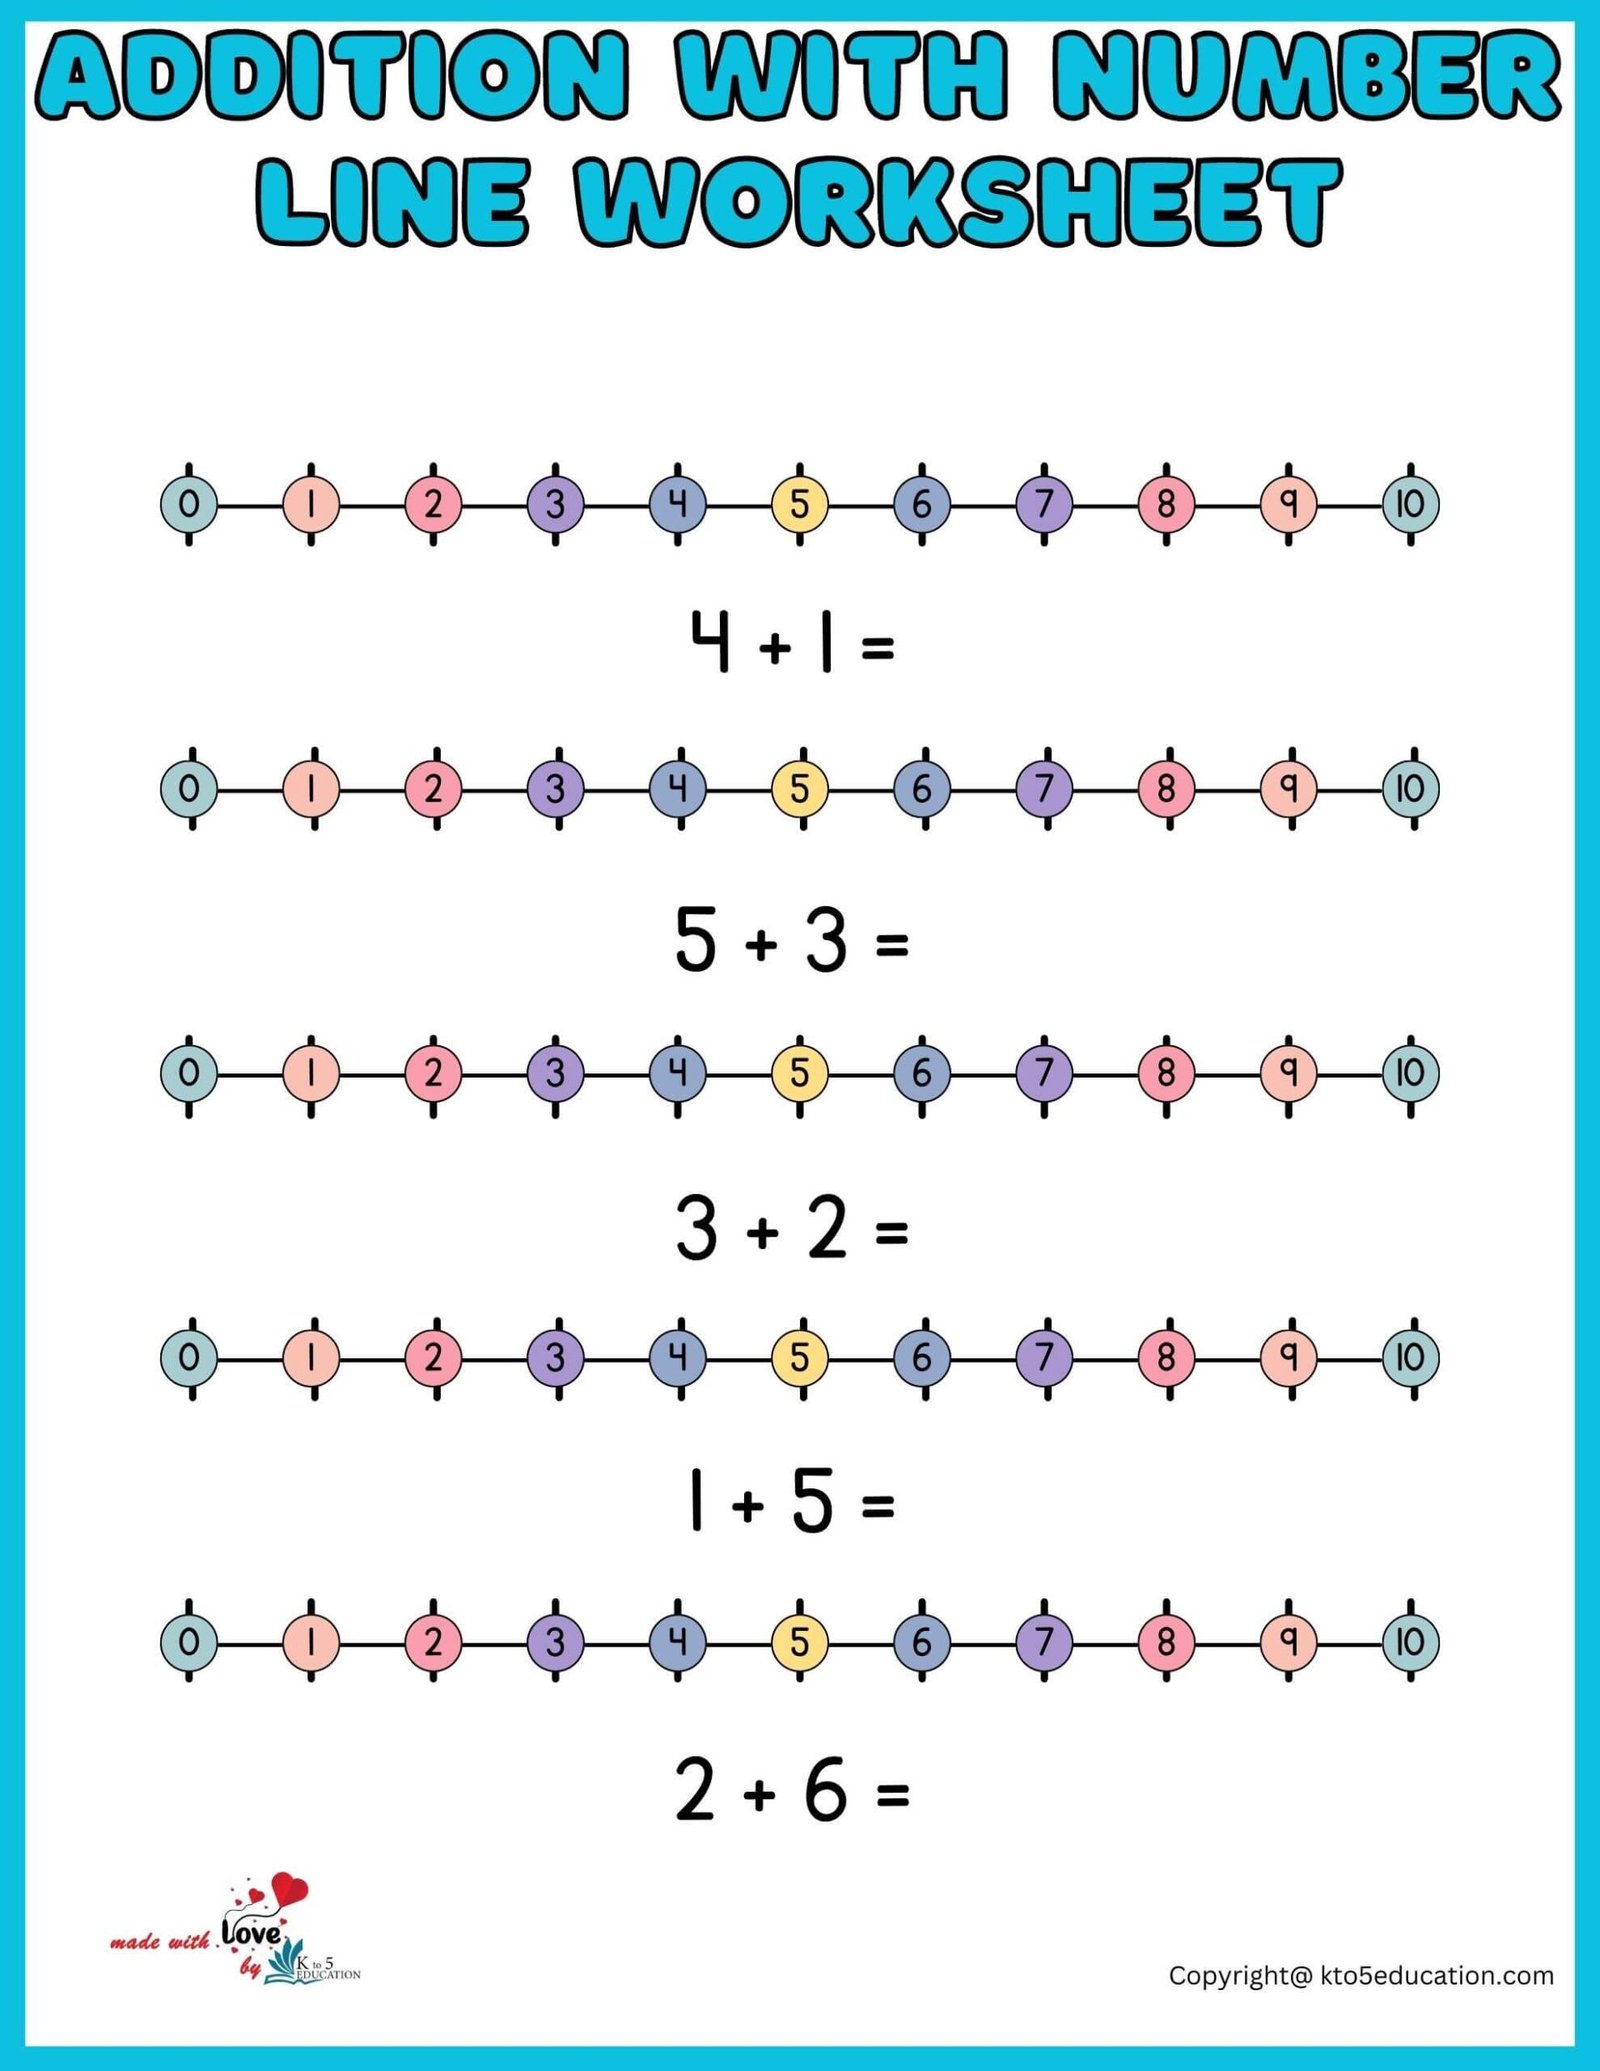 free-addition-with-number-line-worksheets-free-download